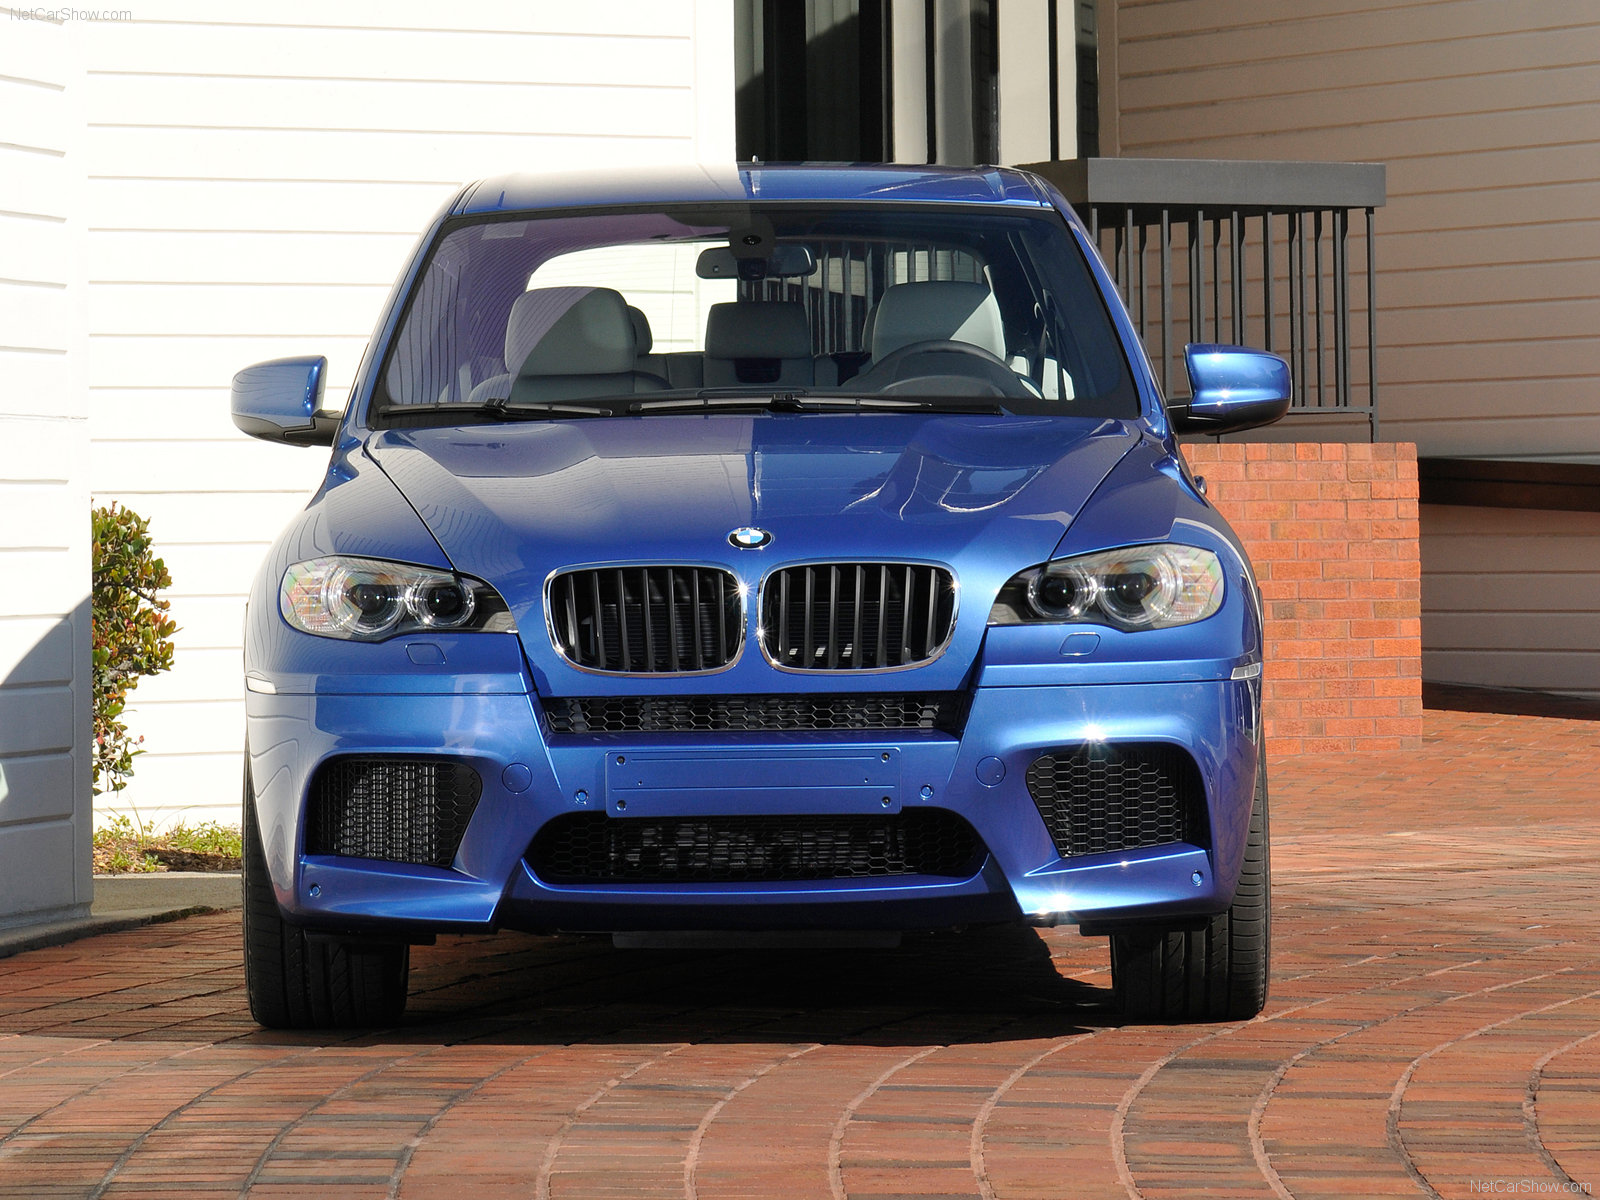 2009 Bmw X5 M Review